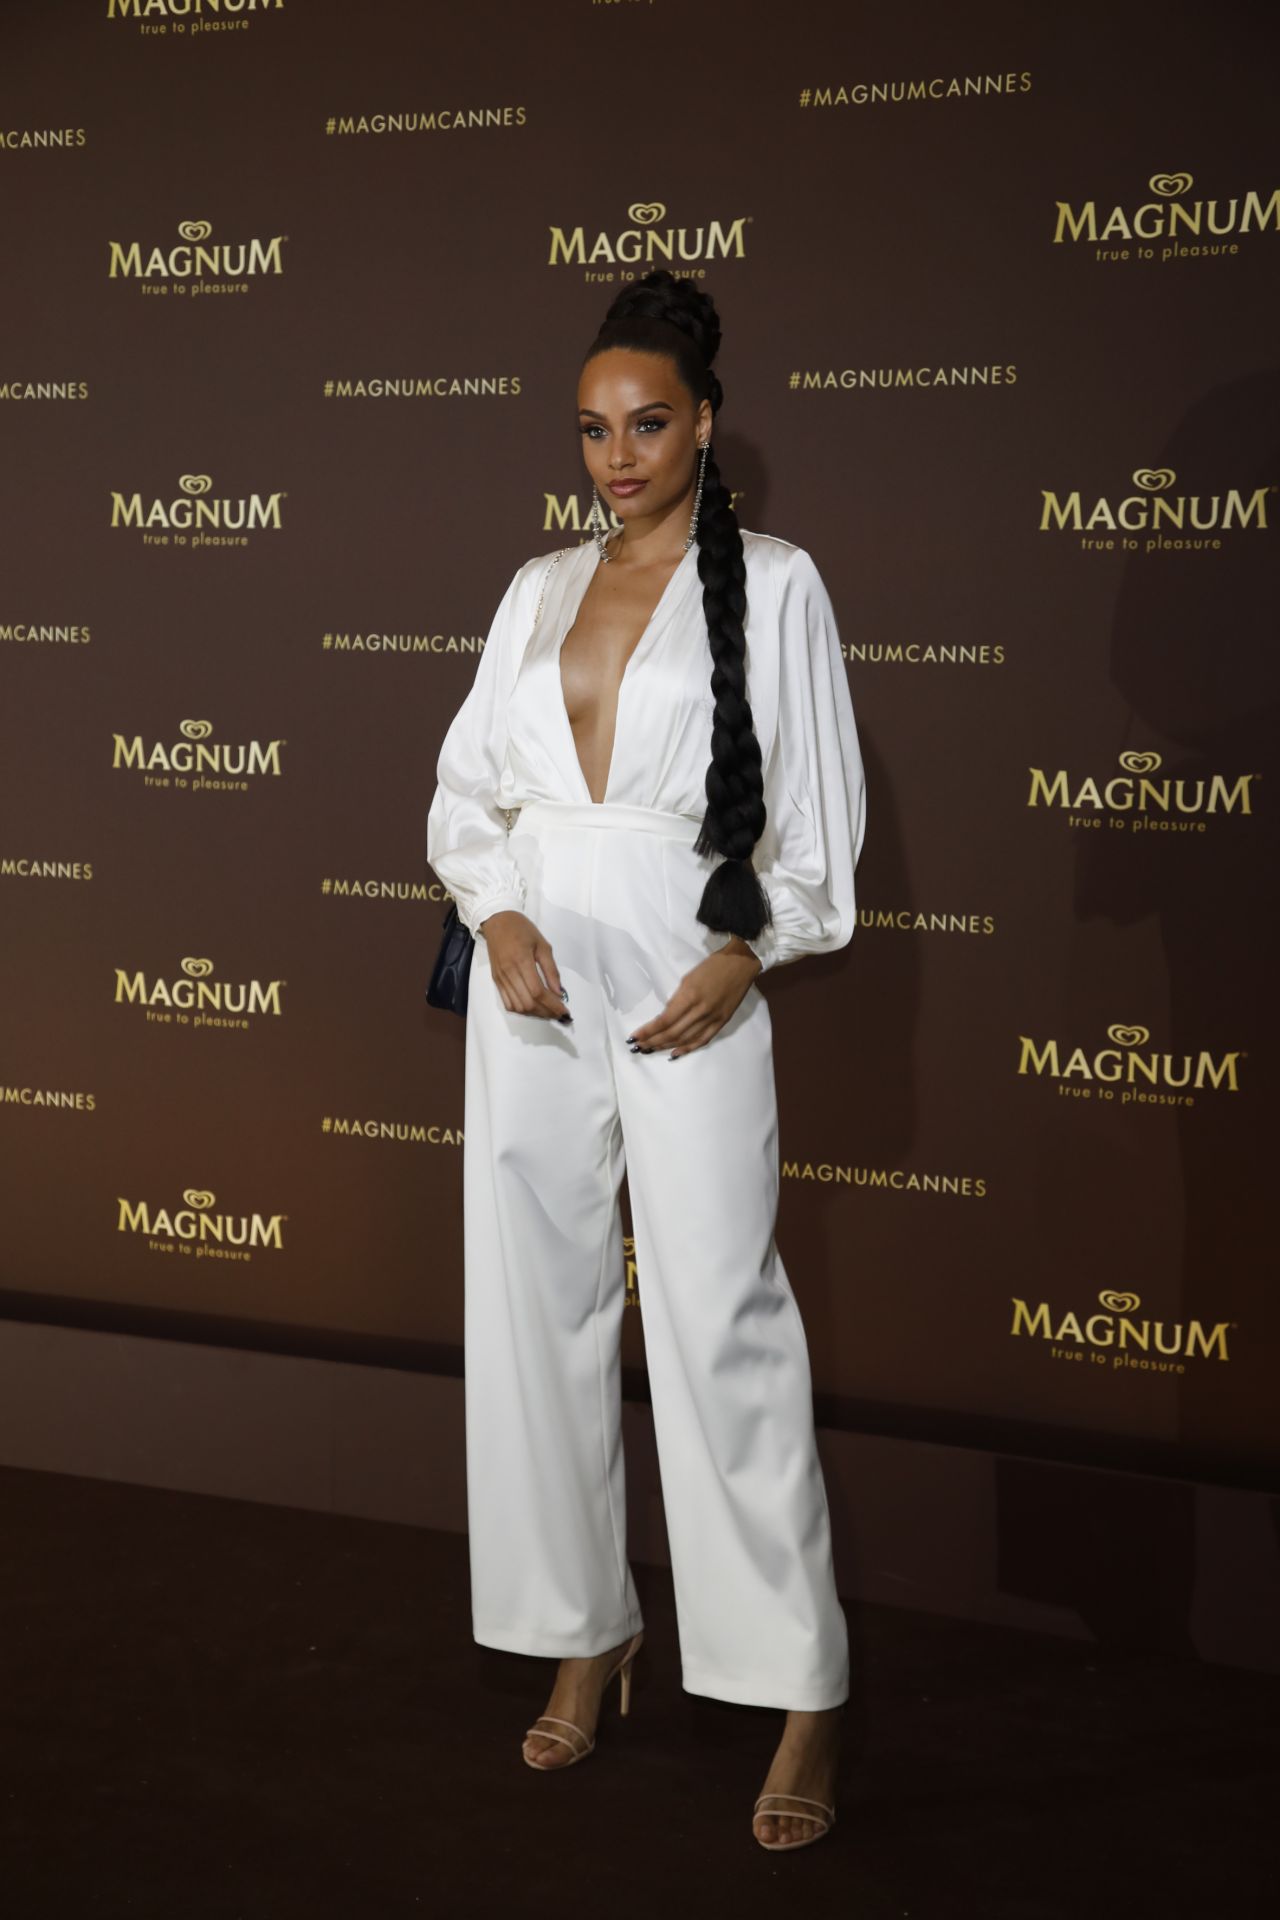 alicia-aylies-magnum-party-at-cannes-film-festival-05-16-2019-5.jpg